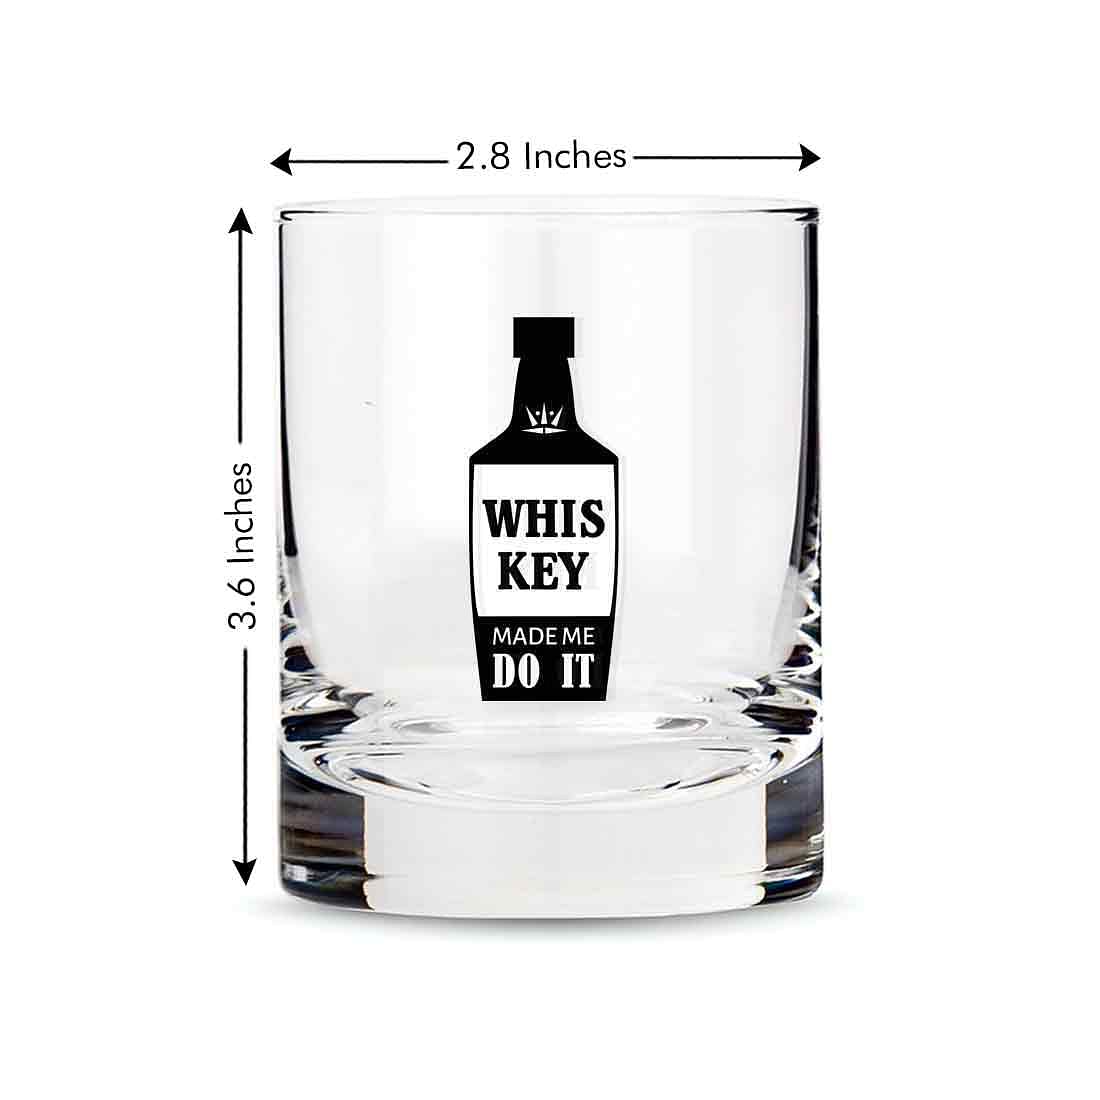 Whiskey Glasses Liquor Glass-  Anniversary Birthday Gift Funny Gifts for Husband Bf - WHISKY MADE ME DO IT Nutcase